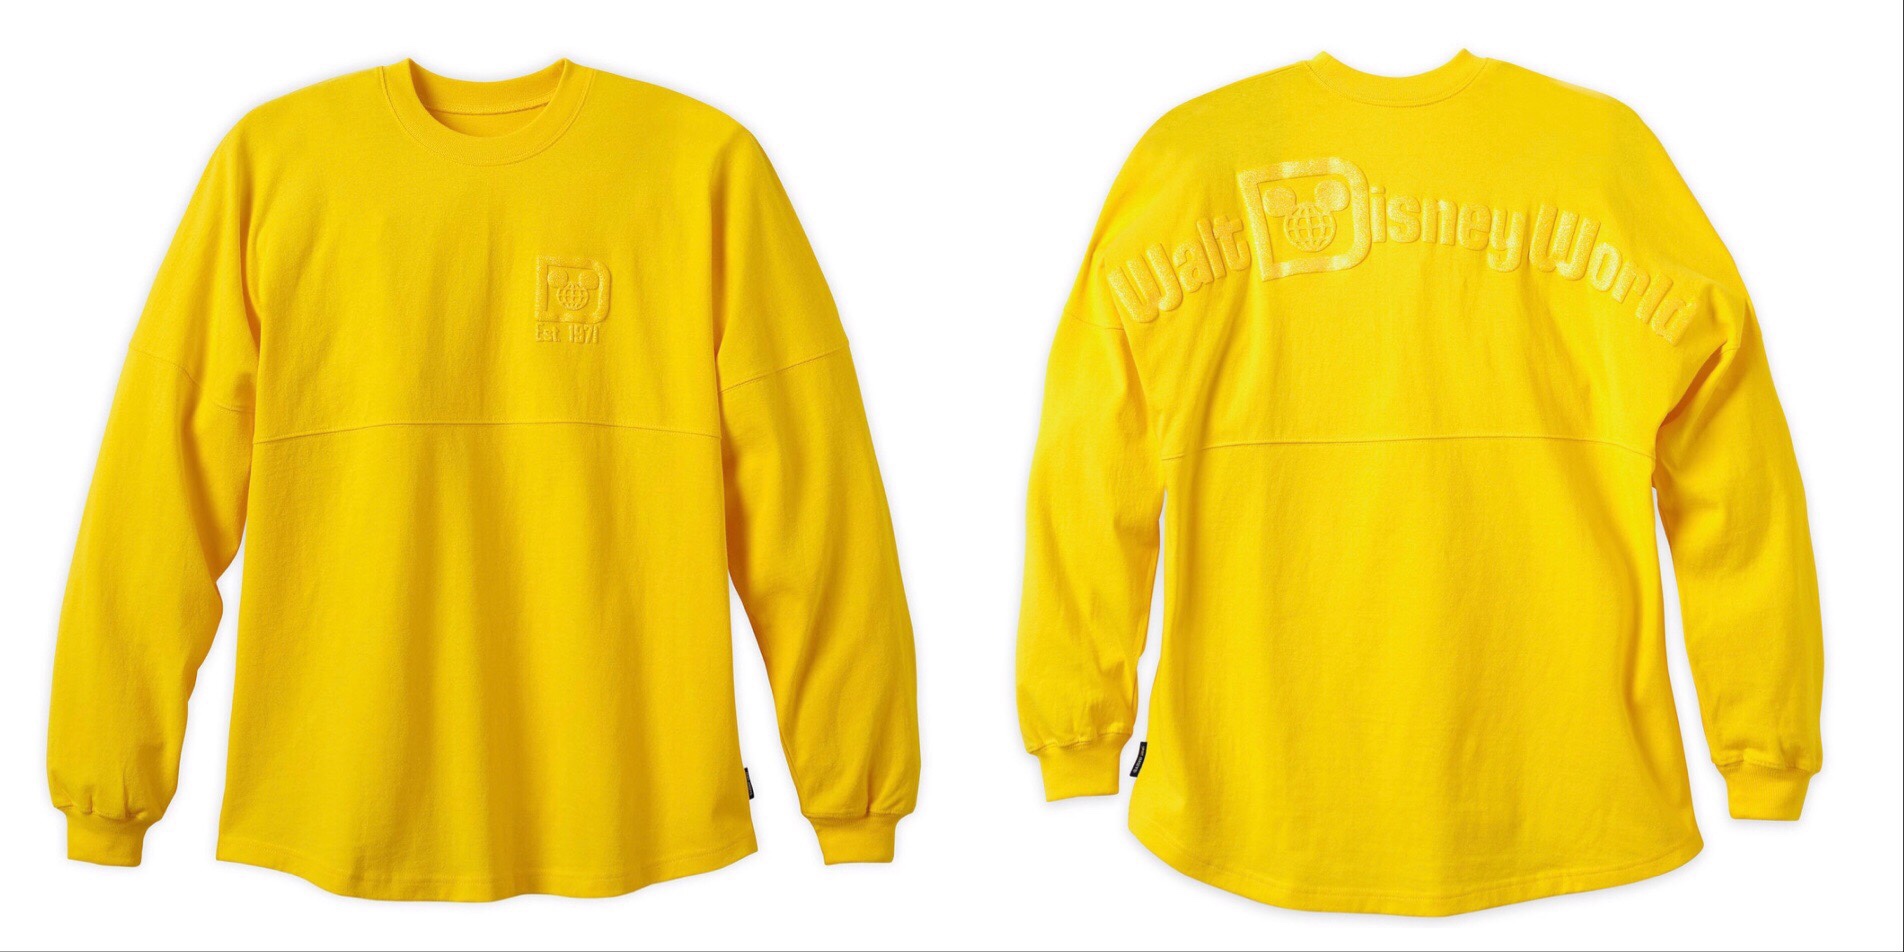 SHOP: Sunshine Yellow Spirit Jersey Now Available